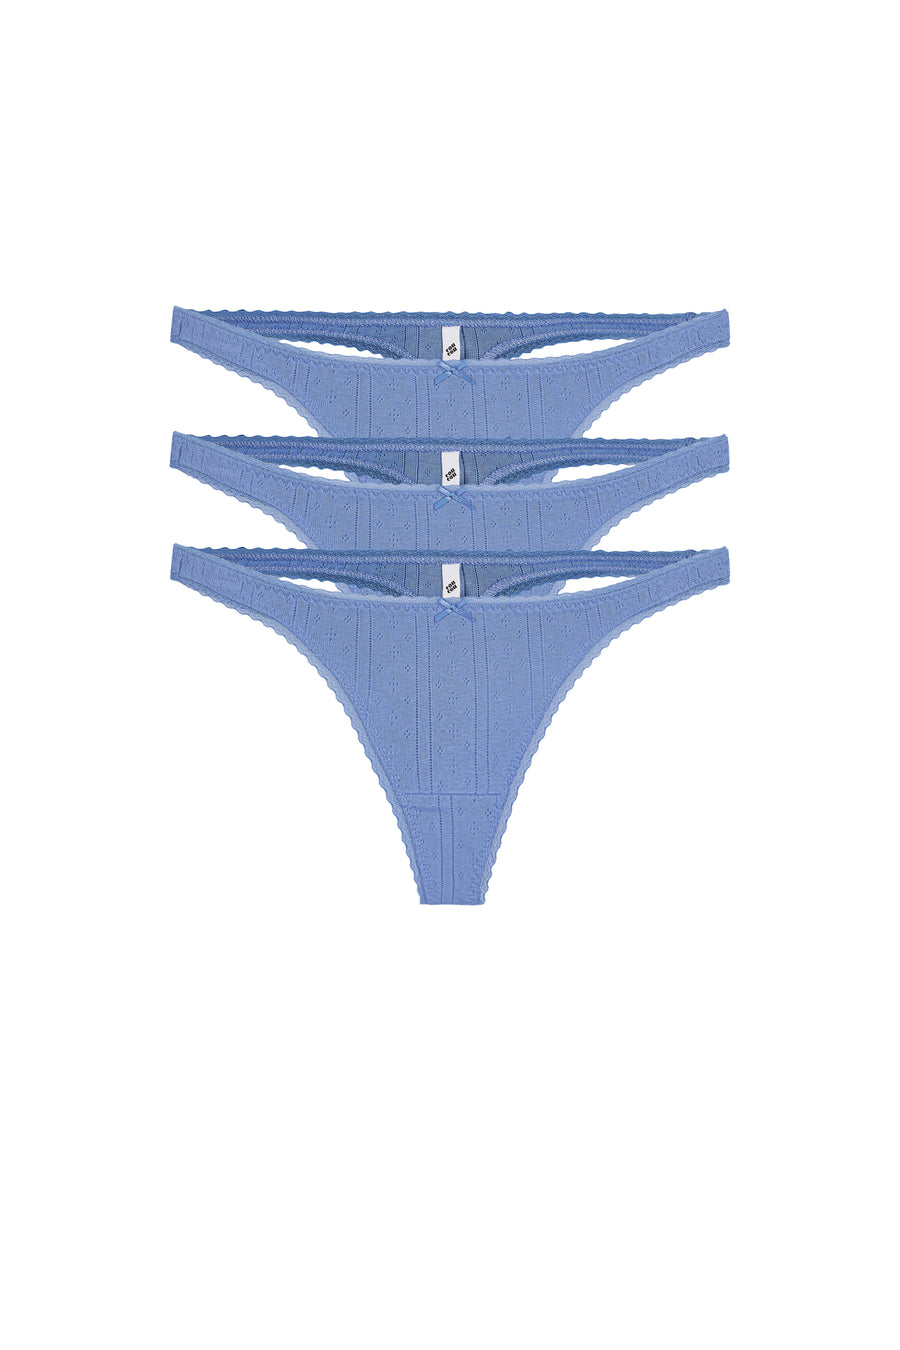 Love Knot [3 in 1 Set] Ribbed Cotton Thongs Panties Underwear/Thong 2024, Buy Love Knot Online